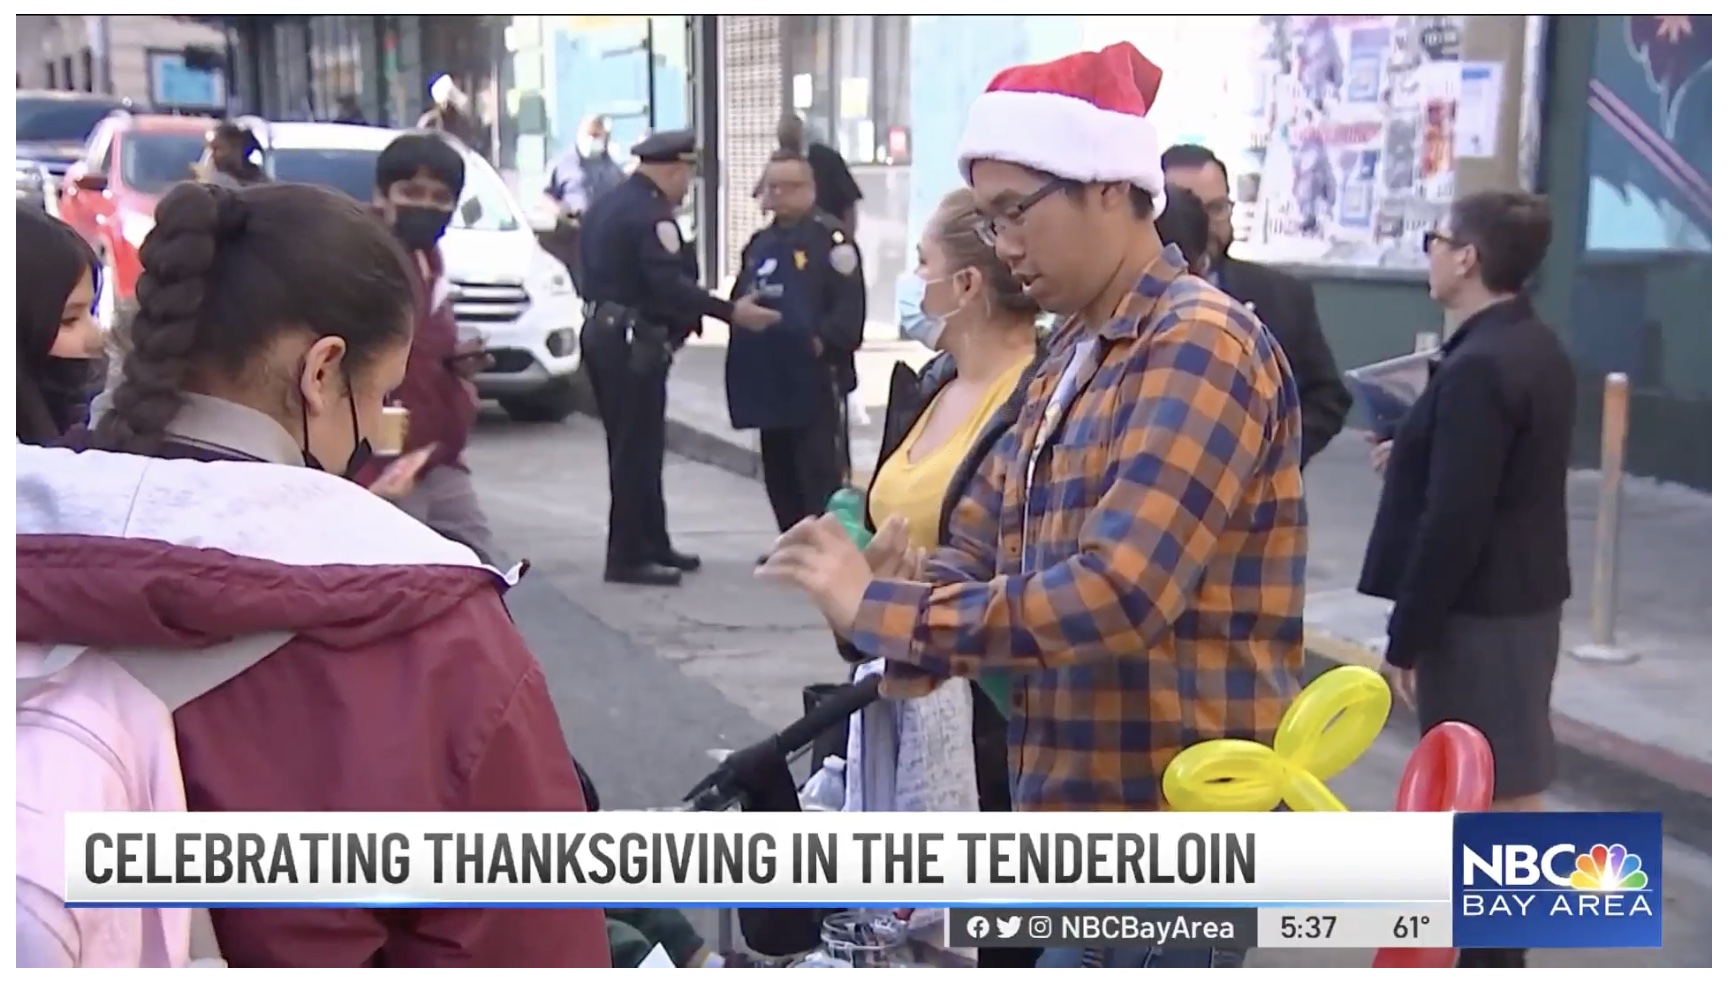 SF Church Aims to Bring Community Together With Tenderloin Pre-Thanksgiving Party